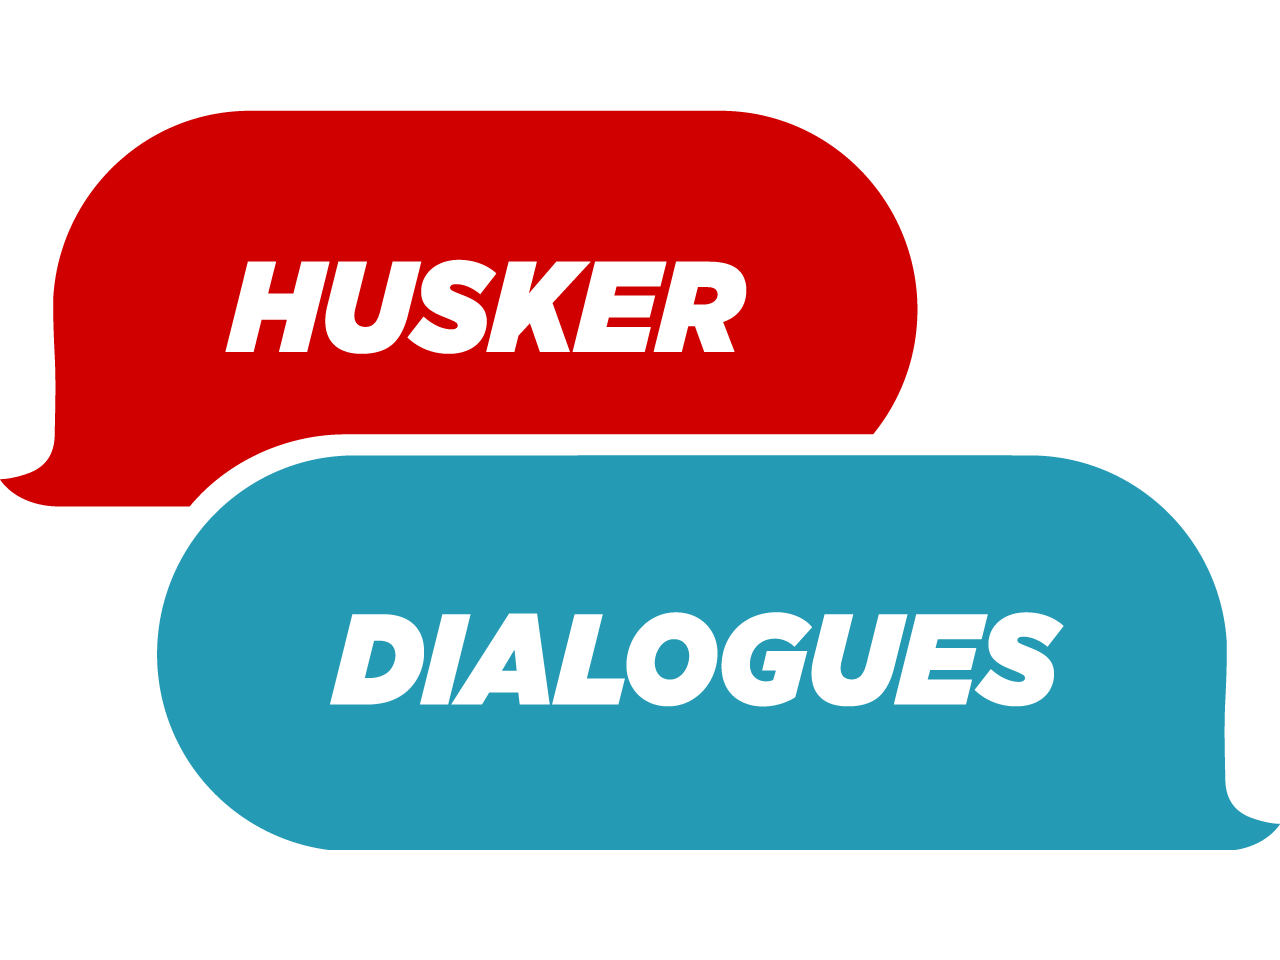 Husker Dialogues 2021 Be Bold. Take the First Step. Announce